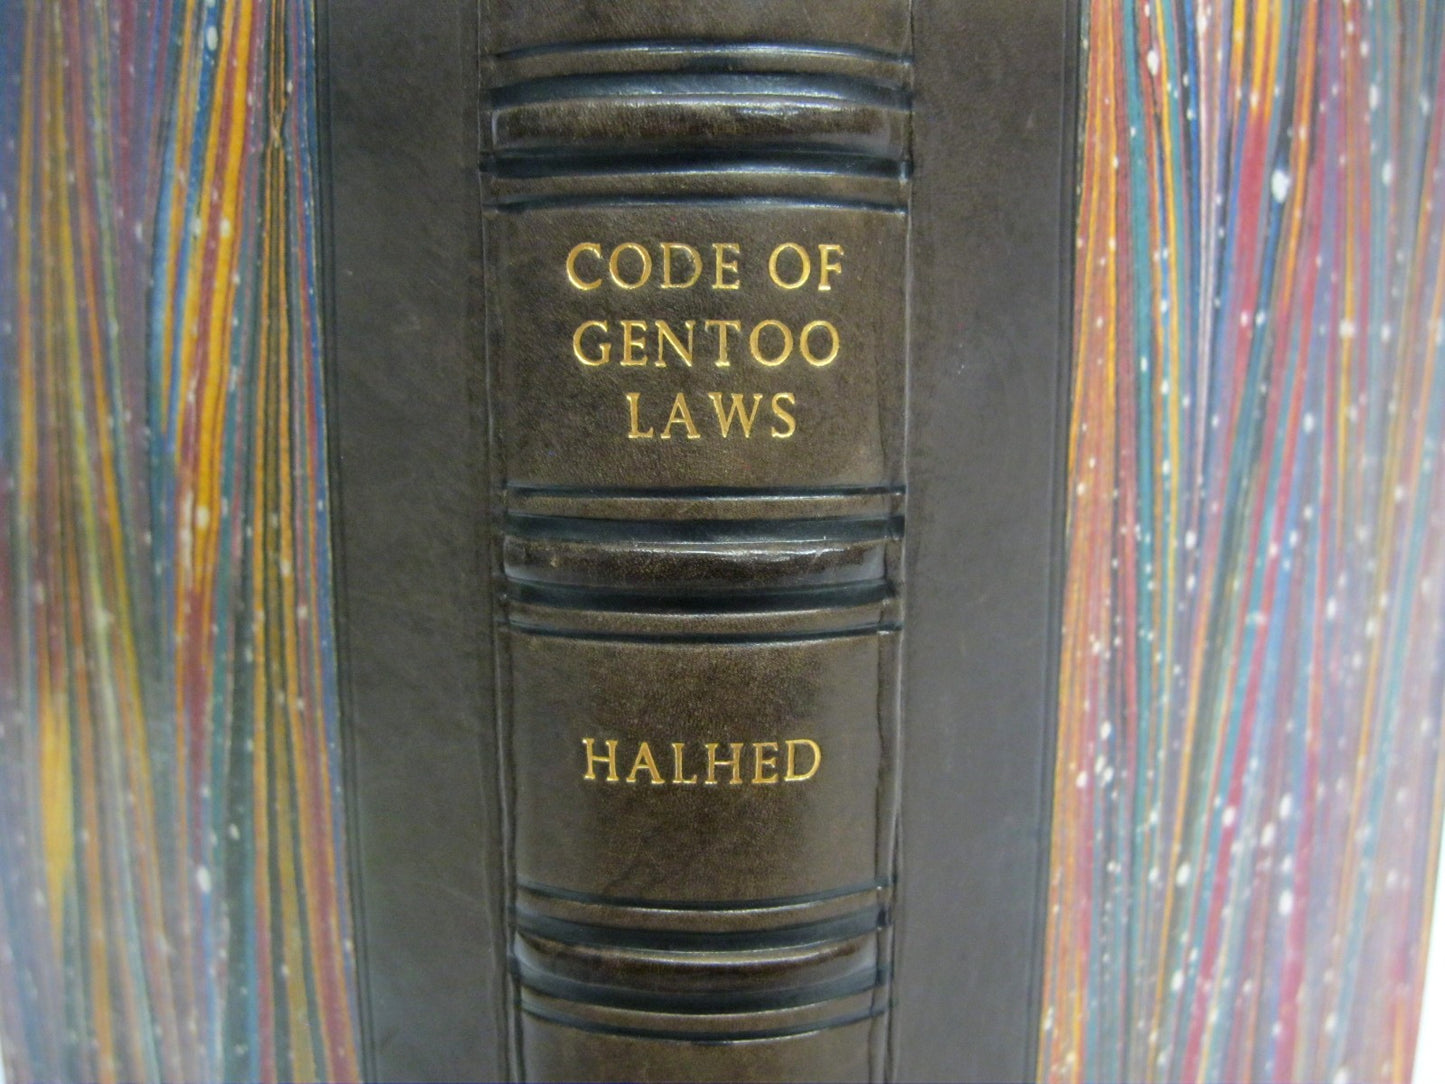 A Code of Gentoo Laws by Nathaniel Halhed